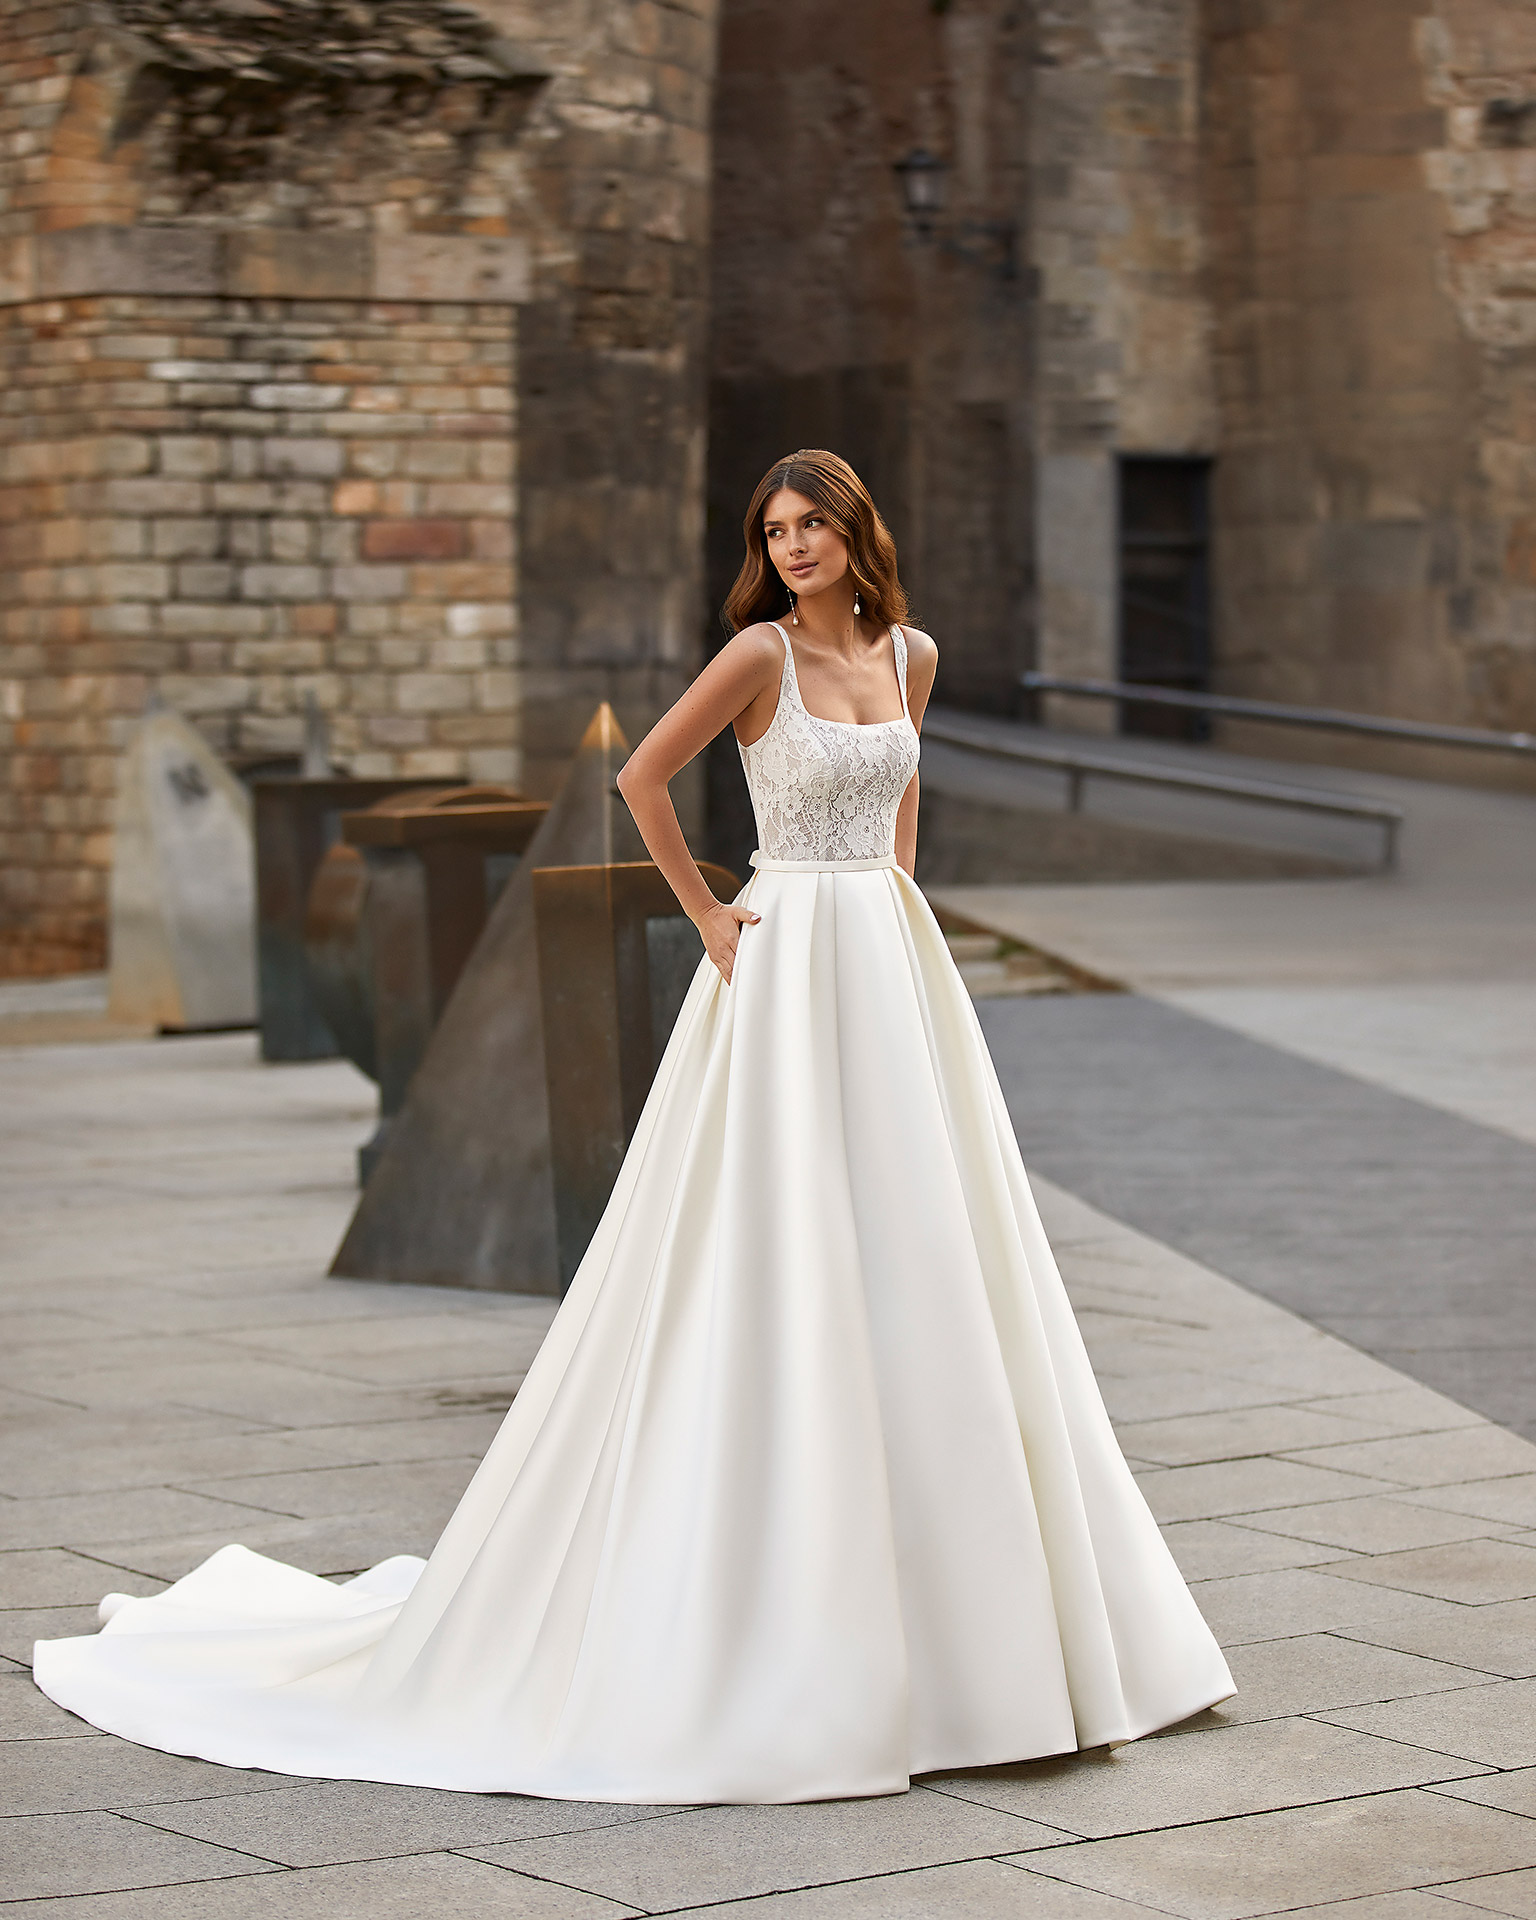 Classic-style wedding dress, made of satin, with a lace bodice; with a square neckline, an open back, and a bow at the back. Dreamy Luna Novias design made of satin combined with lace. LUNA_NOVIAS.